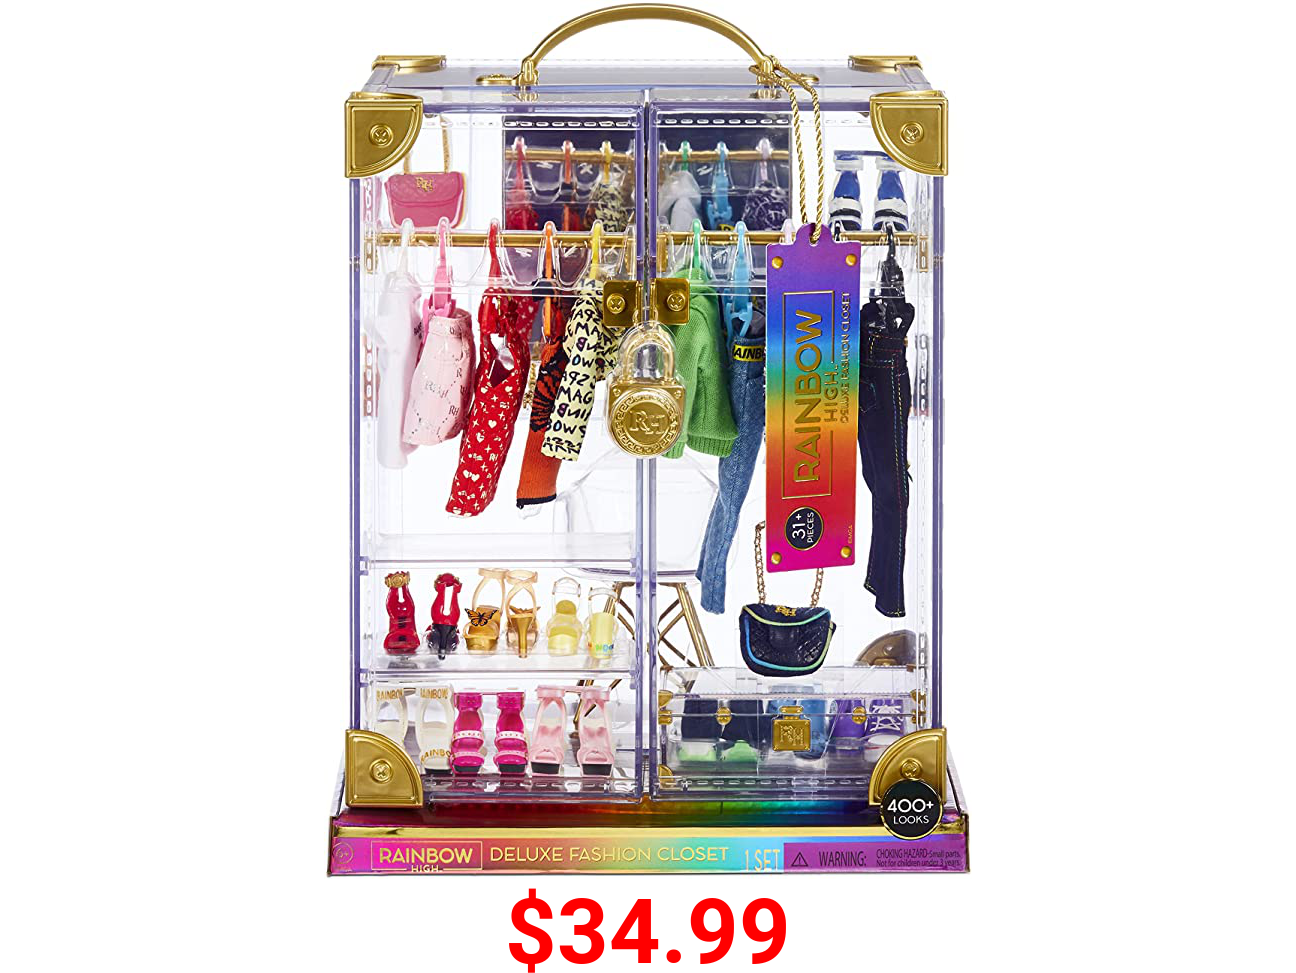 Rainbow High Deluxe Fashion Closet Playset–400+ Fashion Combinations! Portable Clear Acrylic Toy Closet Features 31+ Fashion Forward Pieces, Doll Clothing, Doll Accessories & Doll Storage | Ages 6-12